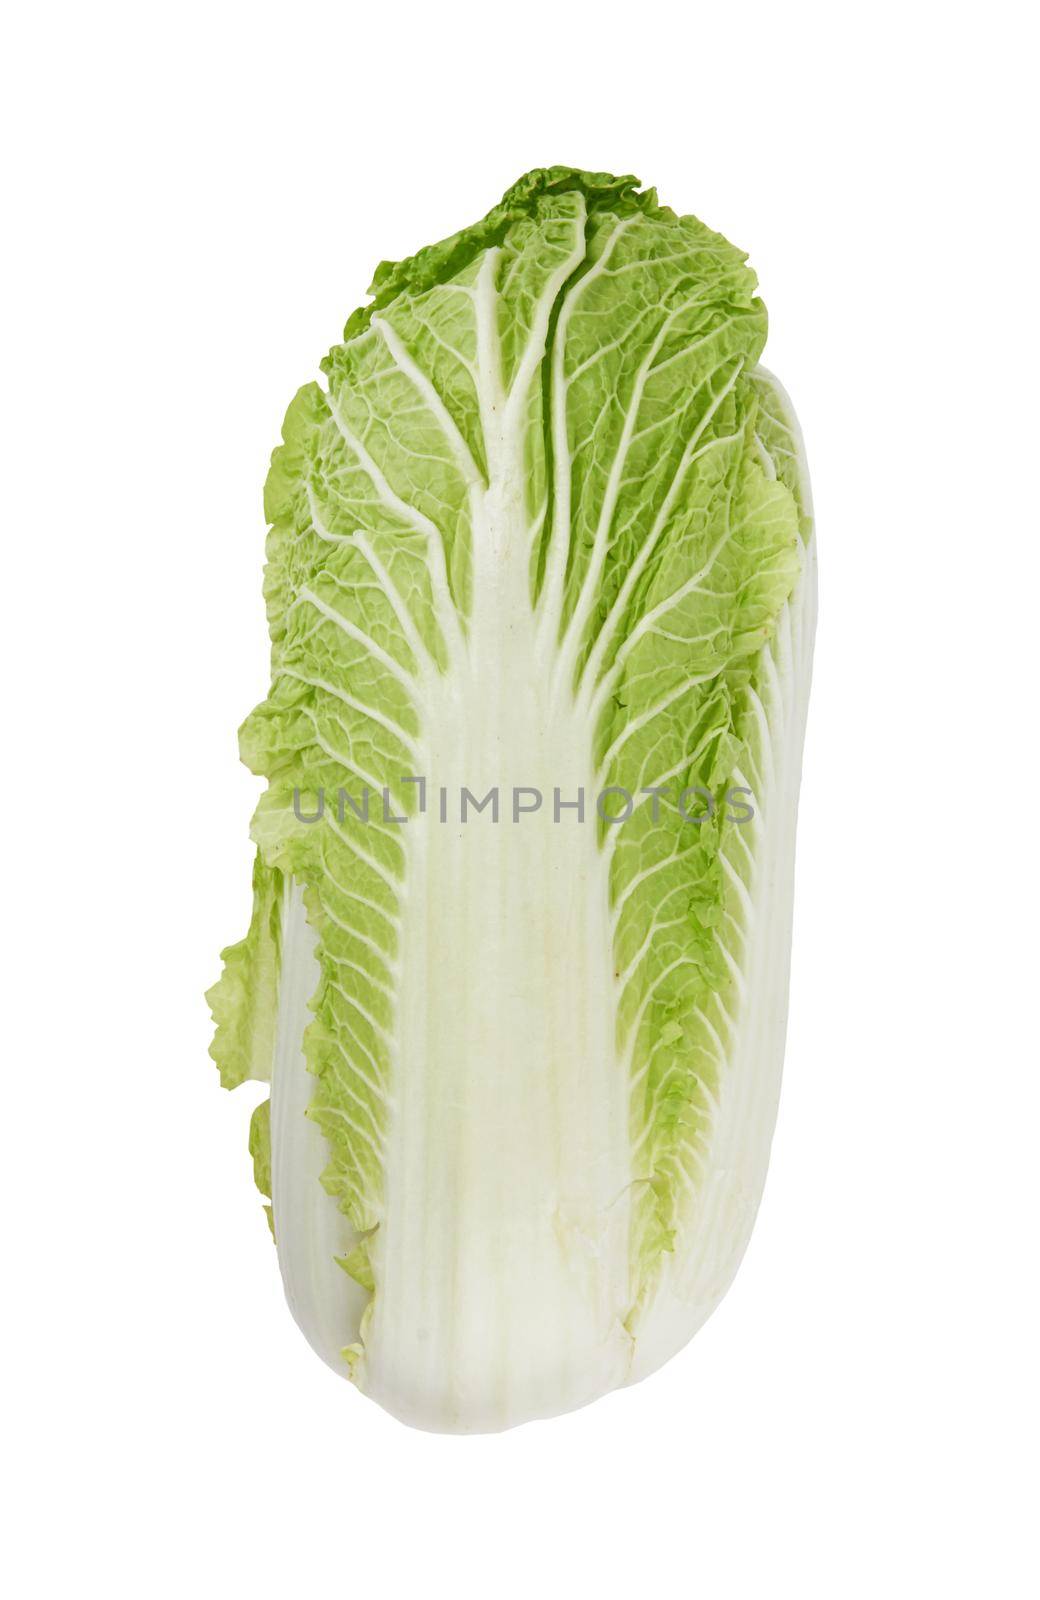 Chinese cabbage on white by pioneer111